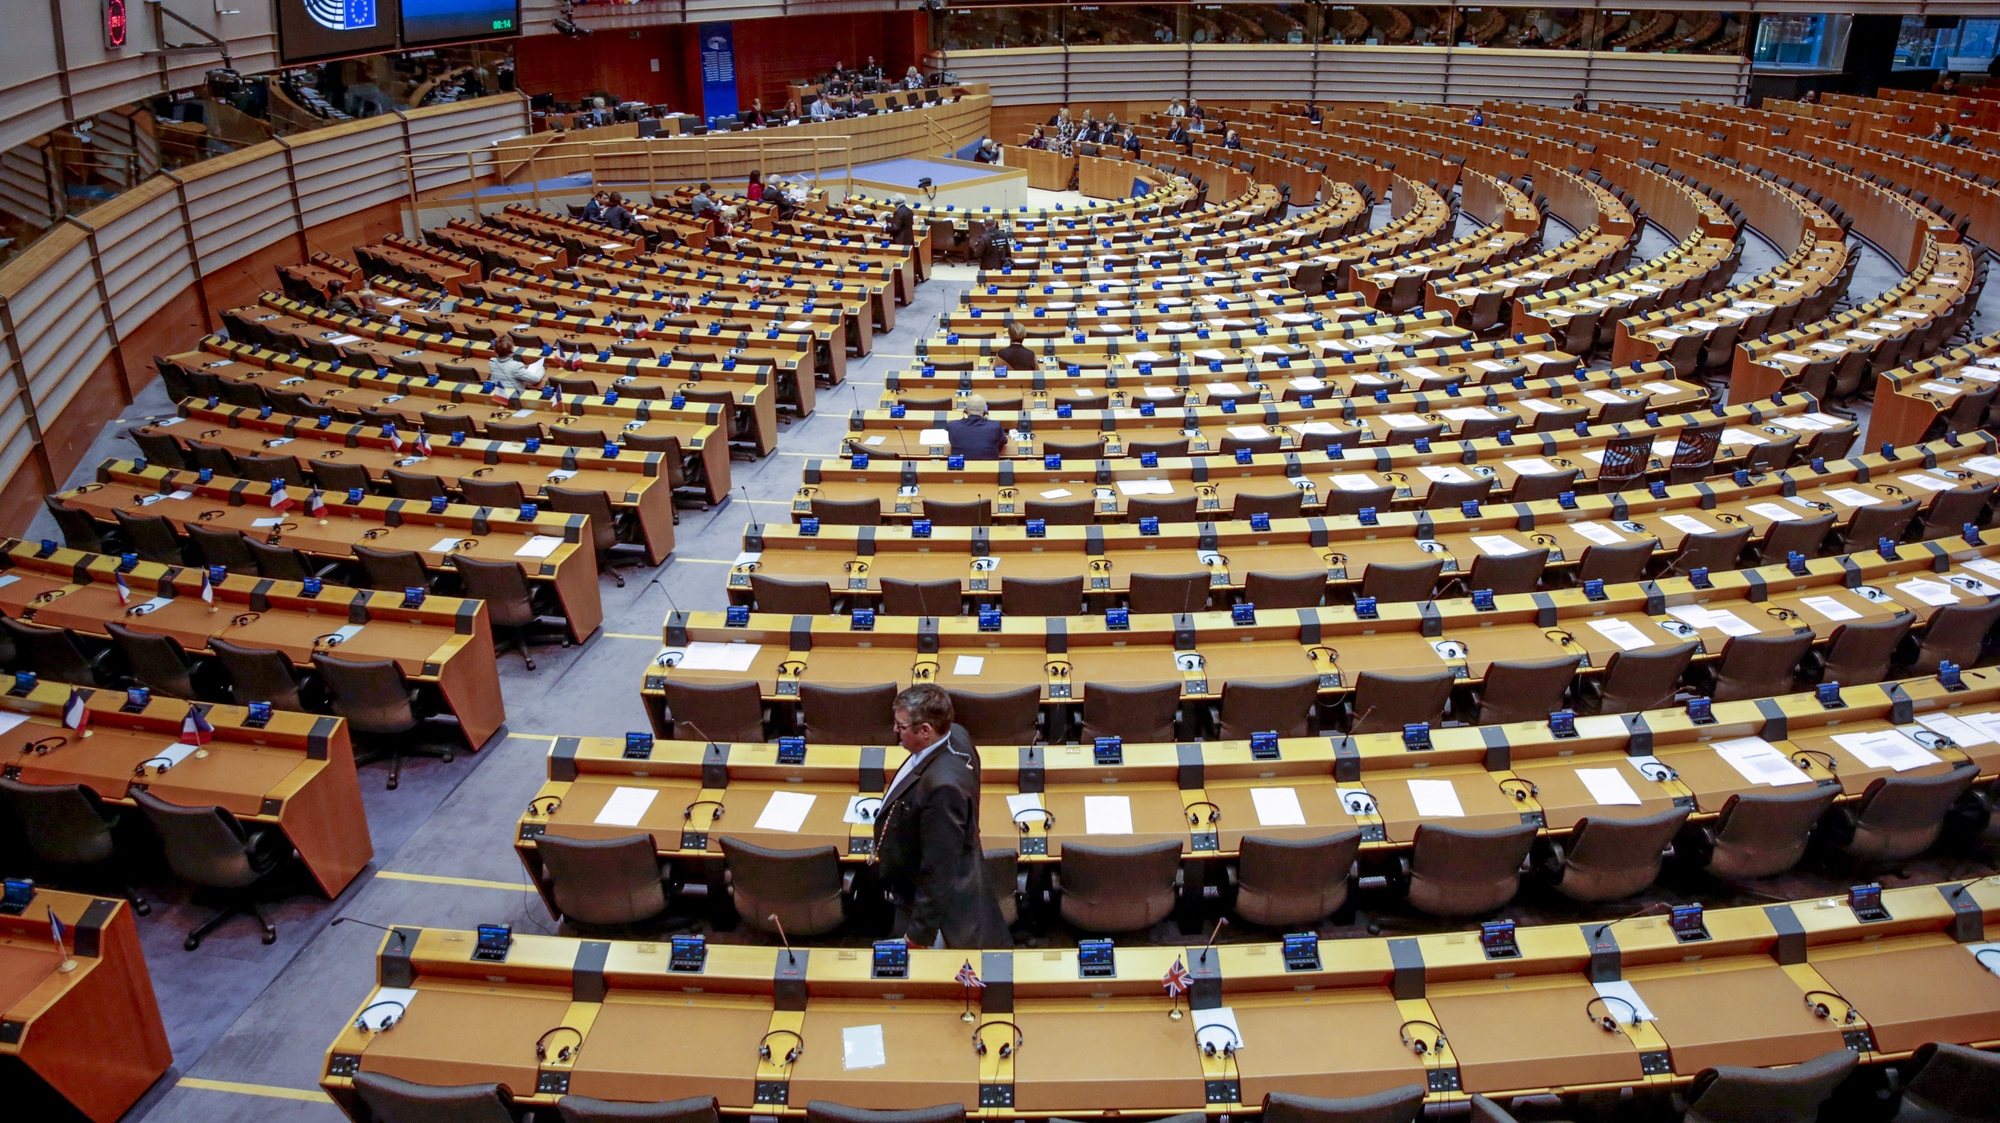 epa07994910 A general view of the European Parliament&#039;s hemicycle on the second day of a &#039;mini-plenary&#039; session in Brussels, Belgium, 14 November 2019. Members of the European Parliament (MEPs) gathered in Brussels for Committee meetings and Plenary Sessions debating the migrants situation&#039;s in Bosnia as well as in Greek islands&#039; hotspots.  EPA/OLIVIER HOSLET